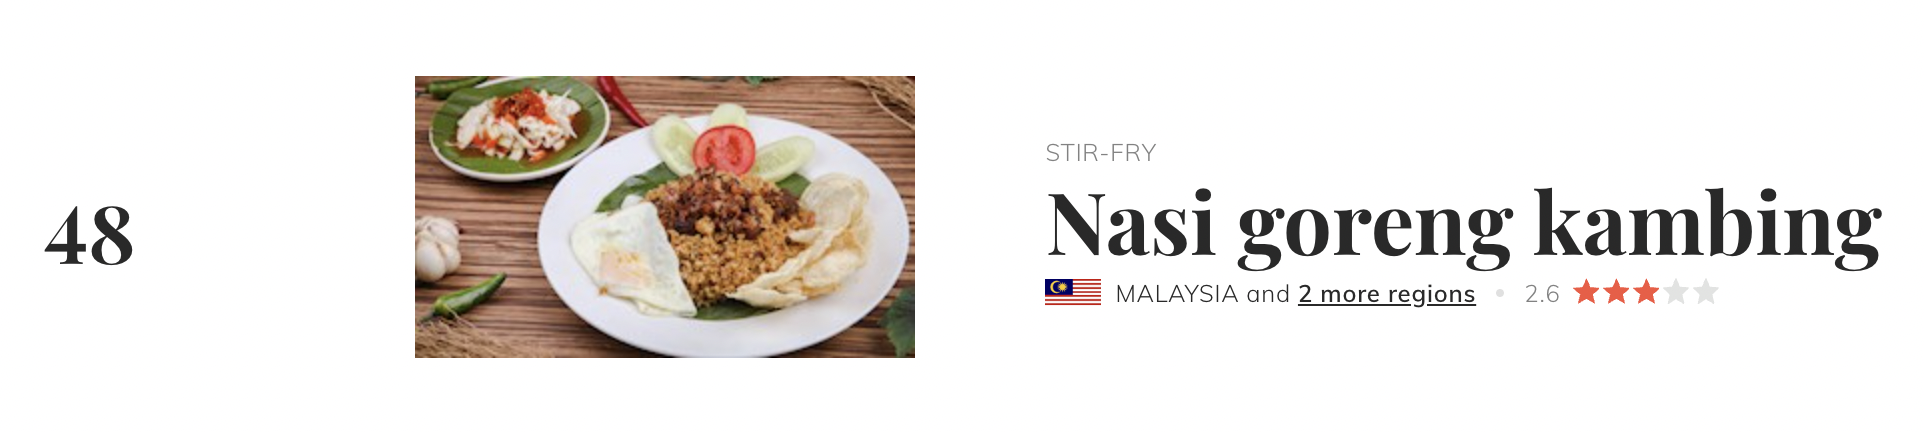 Nasi goreng kambing ranked at 48th place on '100 worst rated foods' list